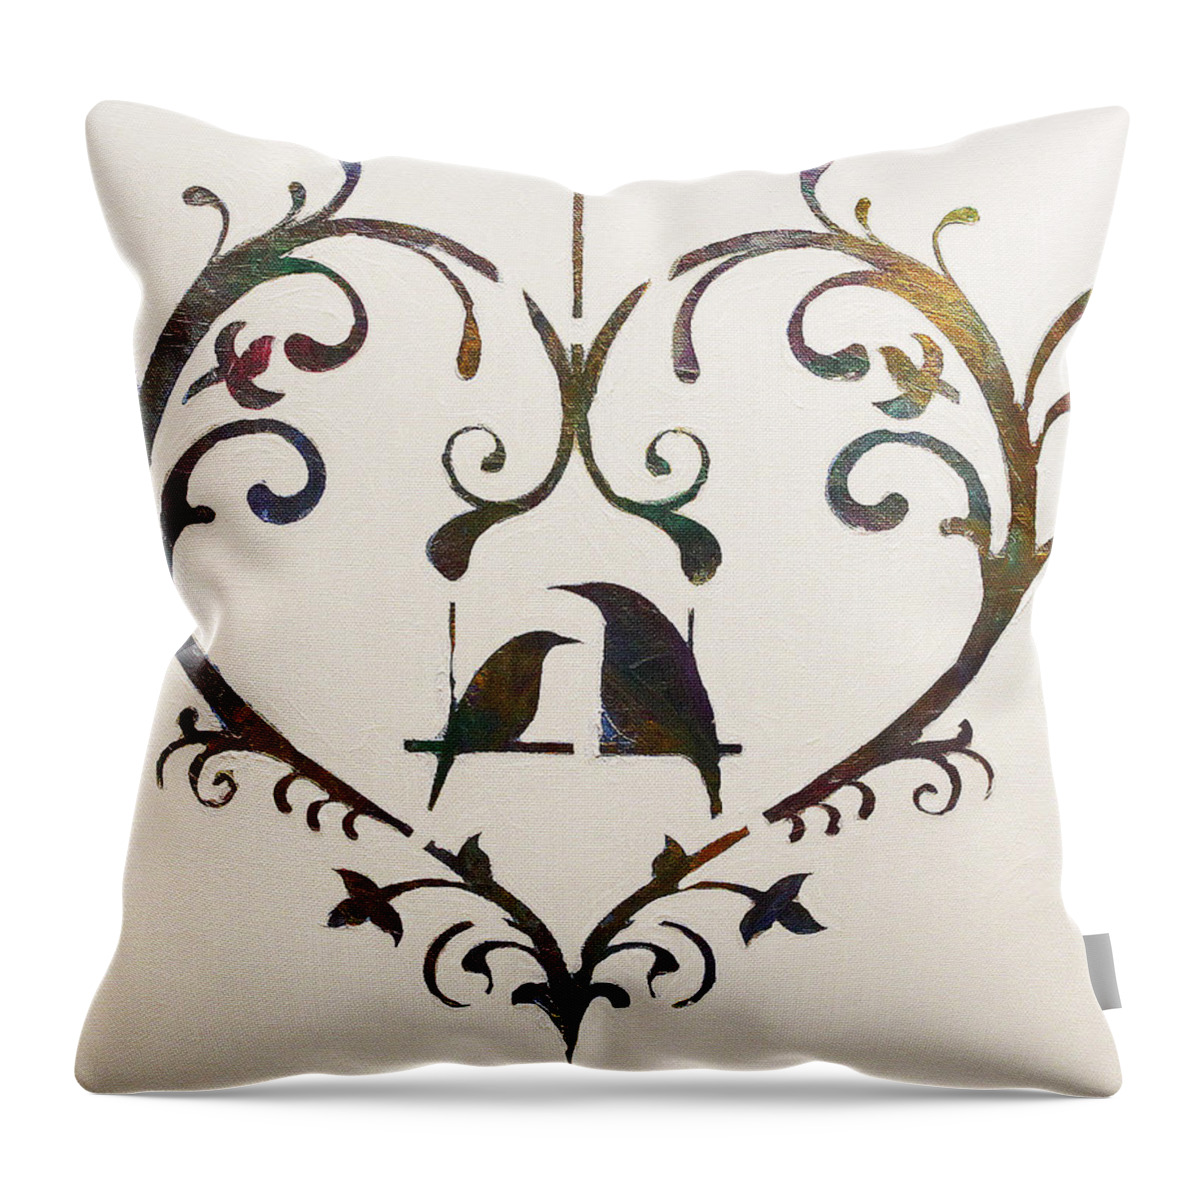 Folk Art Throw Pillow featuring the painting Let Me Count The Ways by Dolores Deal